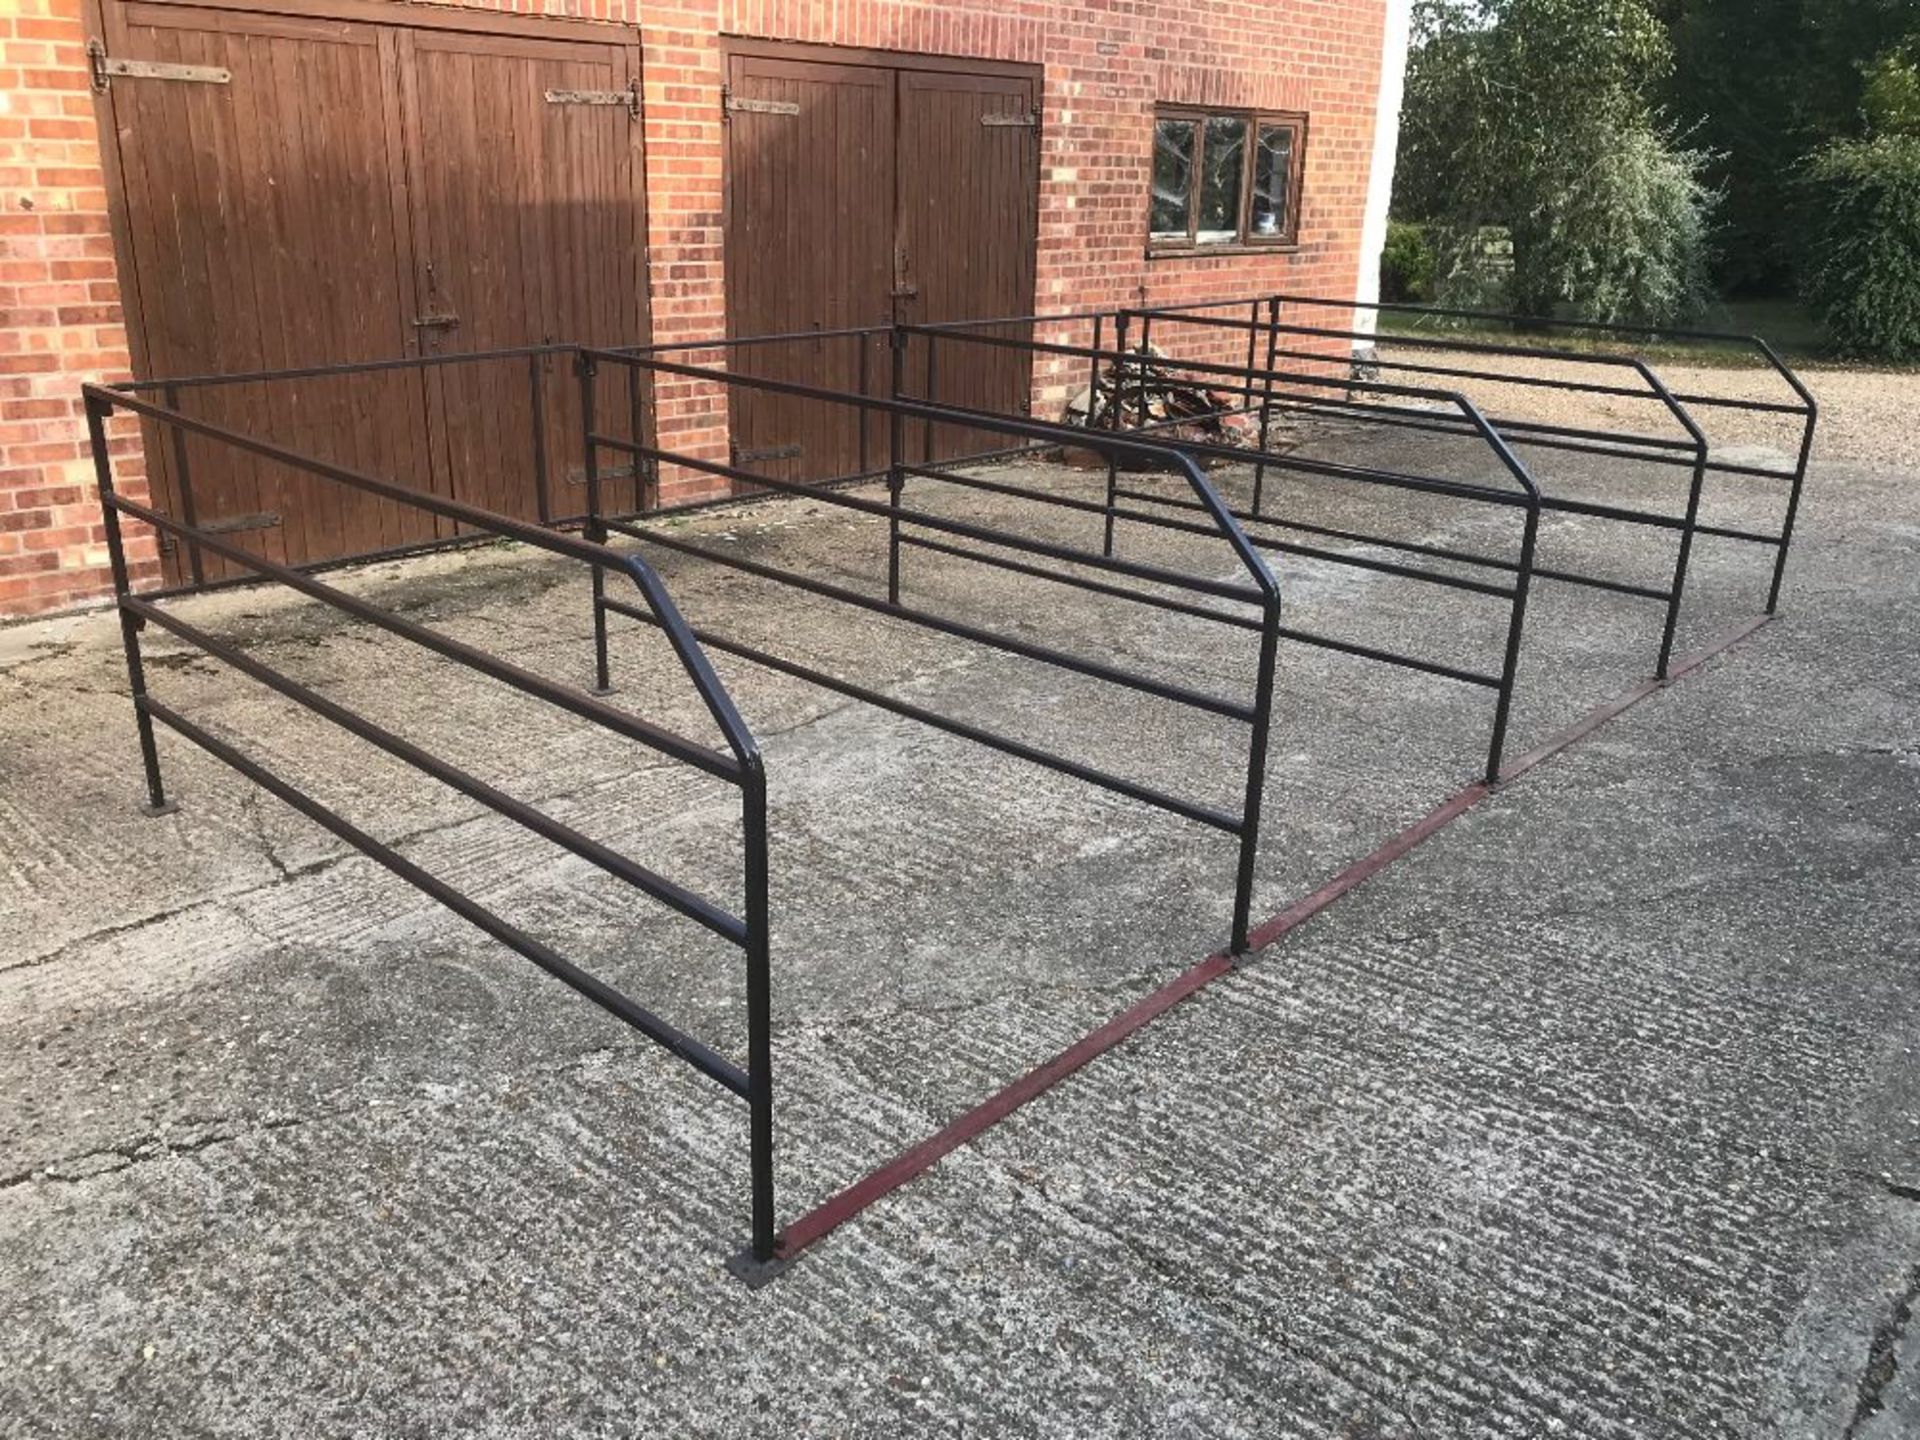 Show hurdles to create 4 stalls